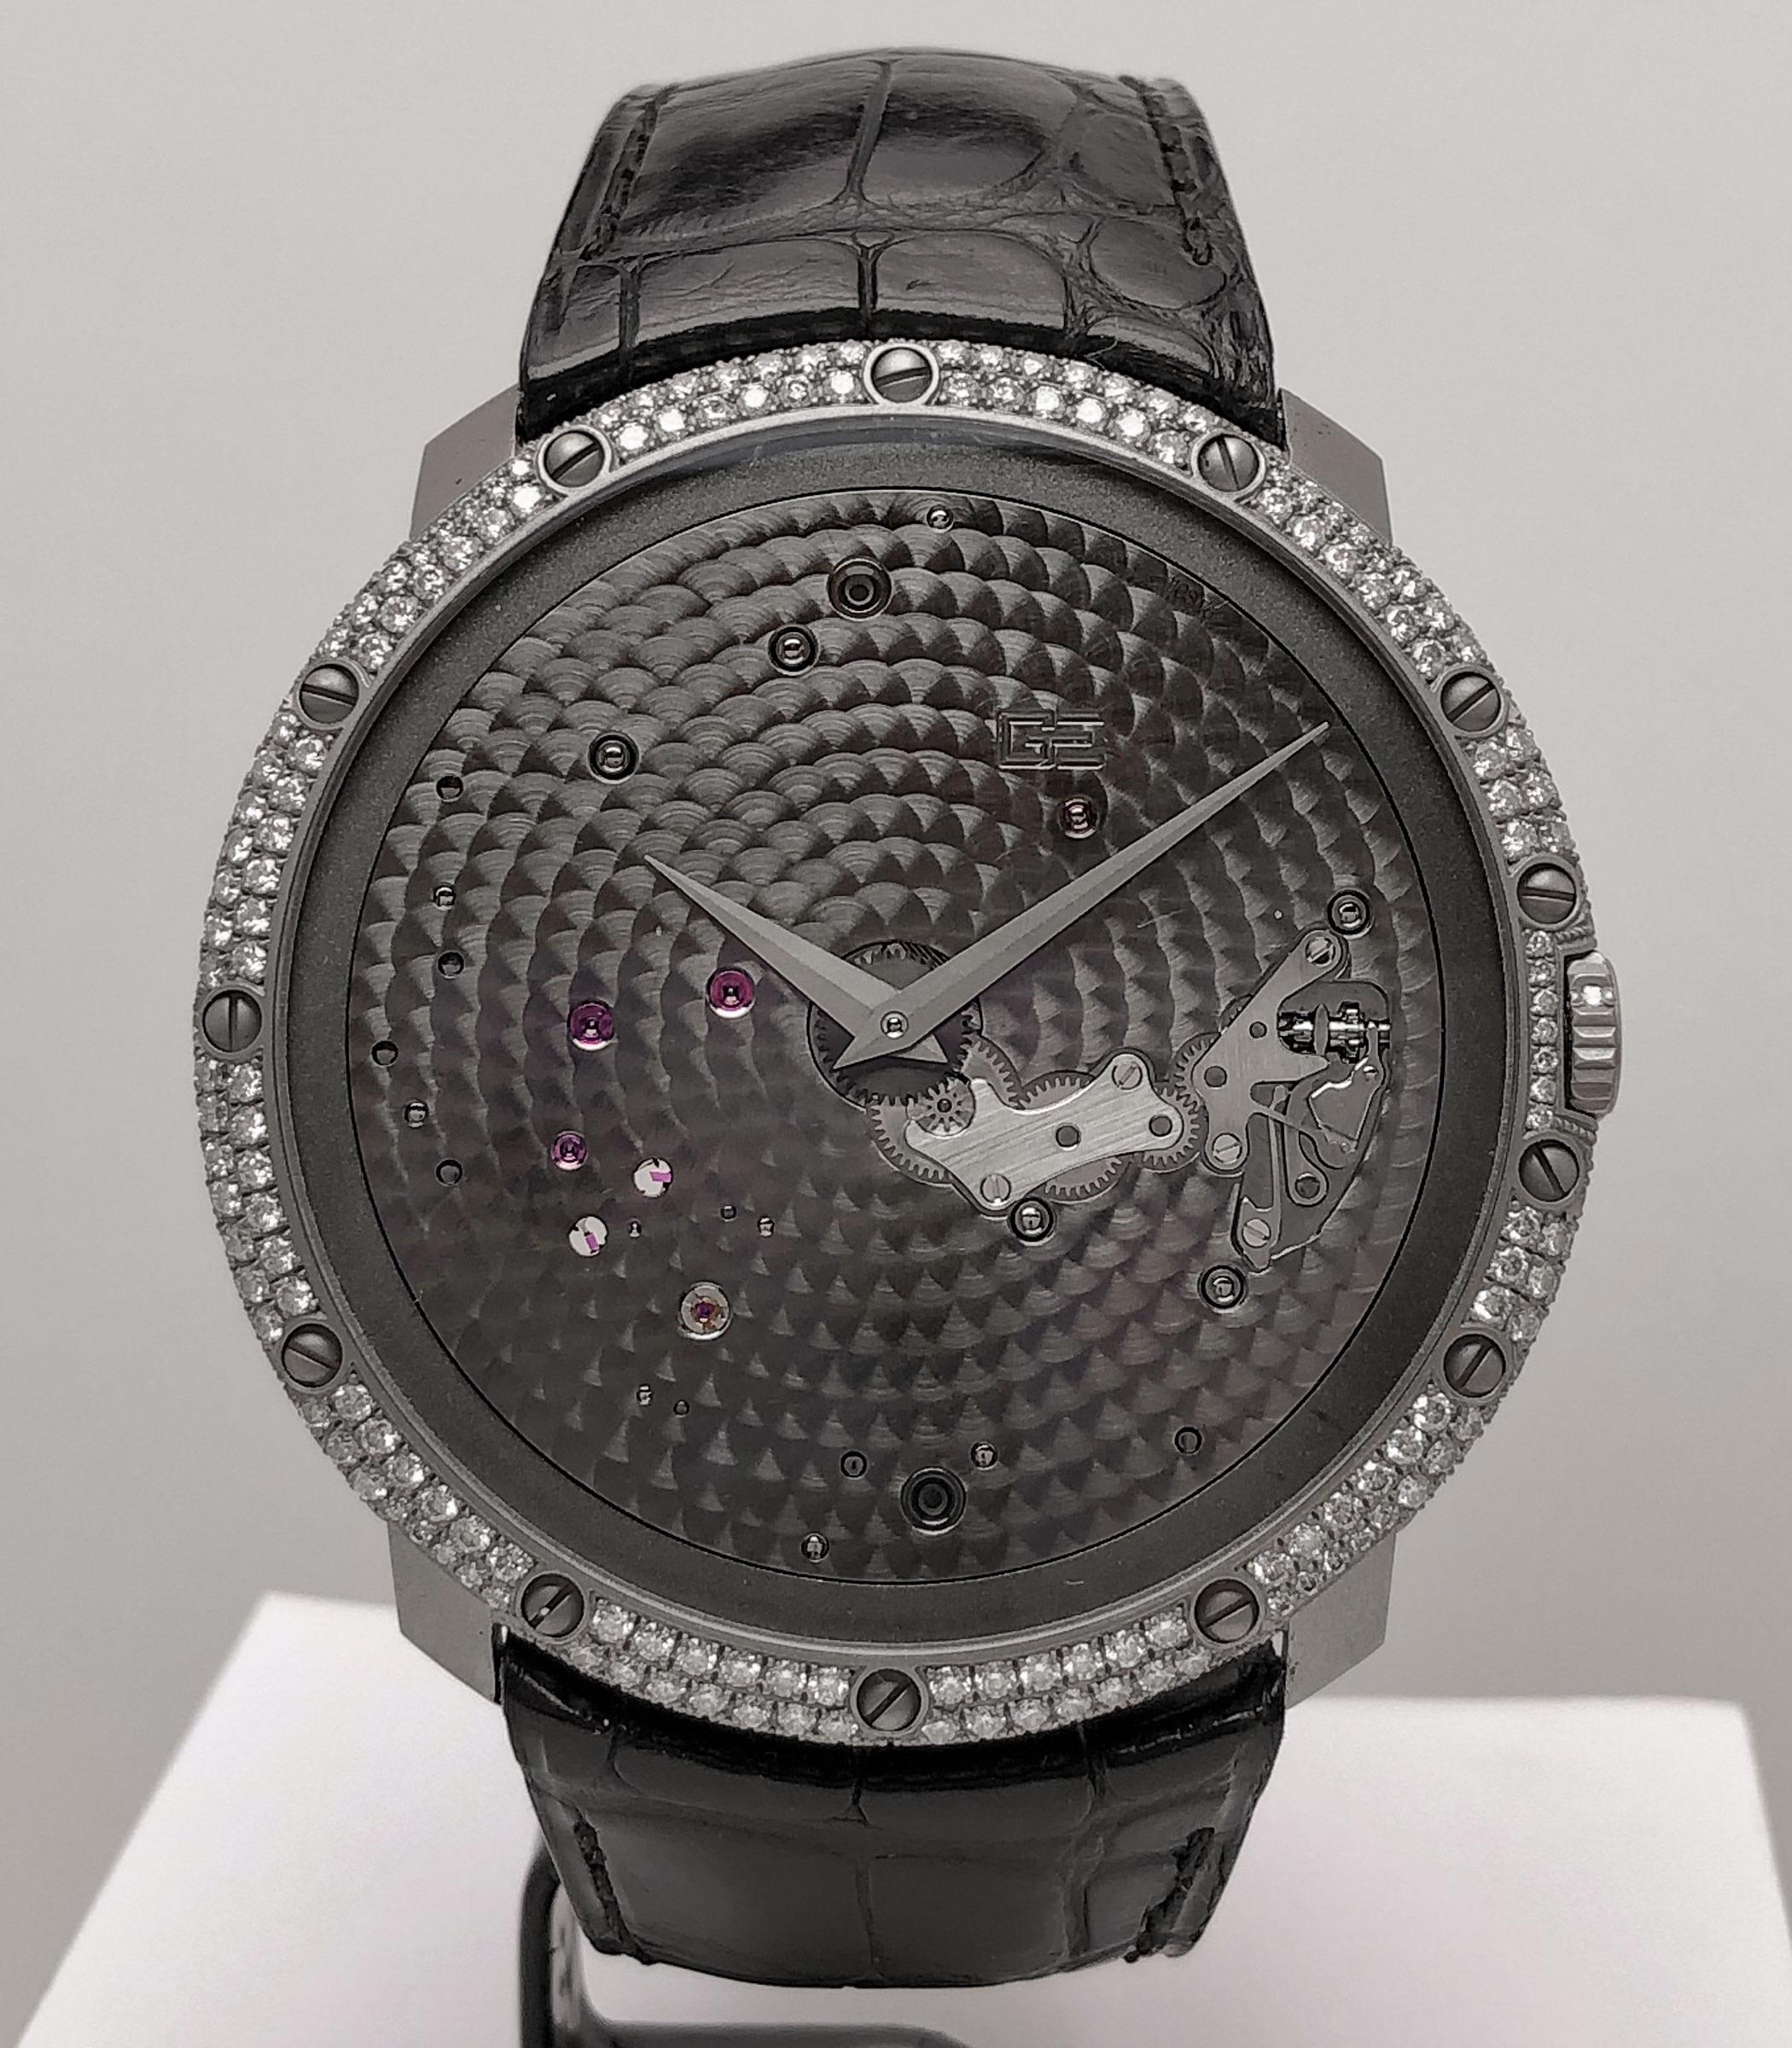 18Kt White Gold and Diamond Time Space
Reference # OG-RS-2388 LV1
Manual Wind
46.8 mm diameter
56 diamonds
43 hour power reserve
30 meters water resistant
Black  crocodile strap with 18kt white gold and diamond tang buckle
Box and warranty